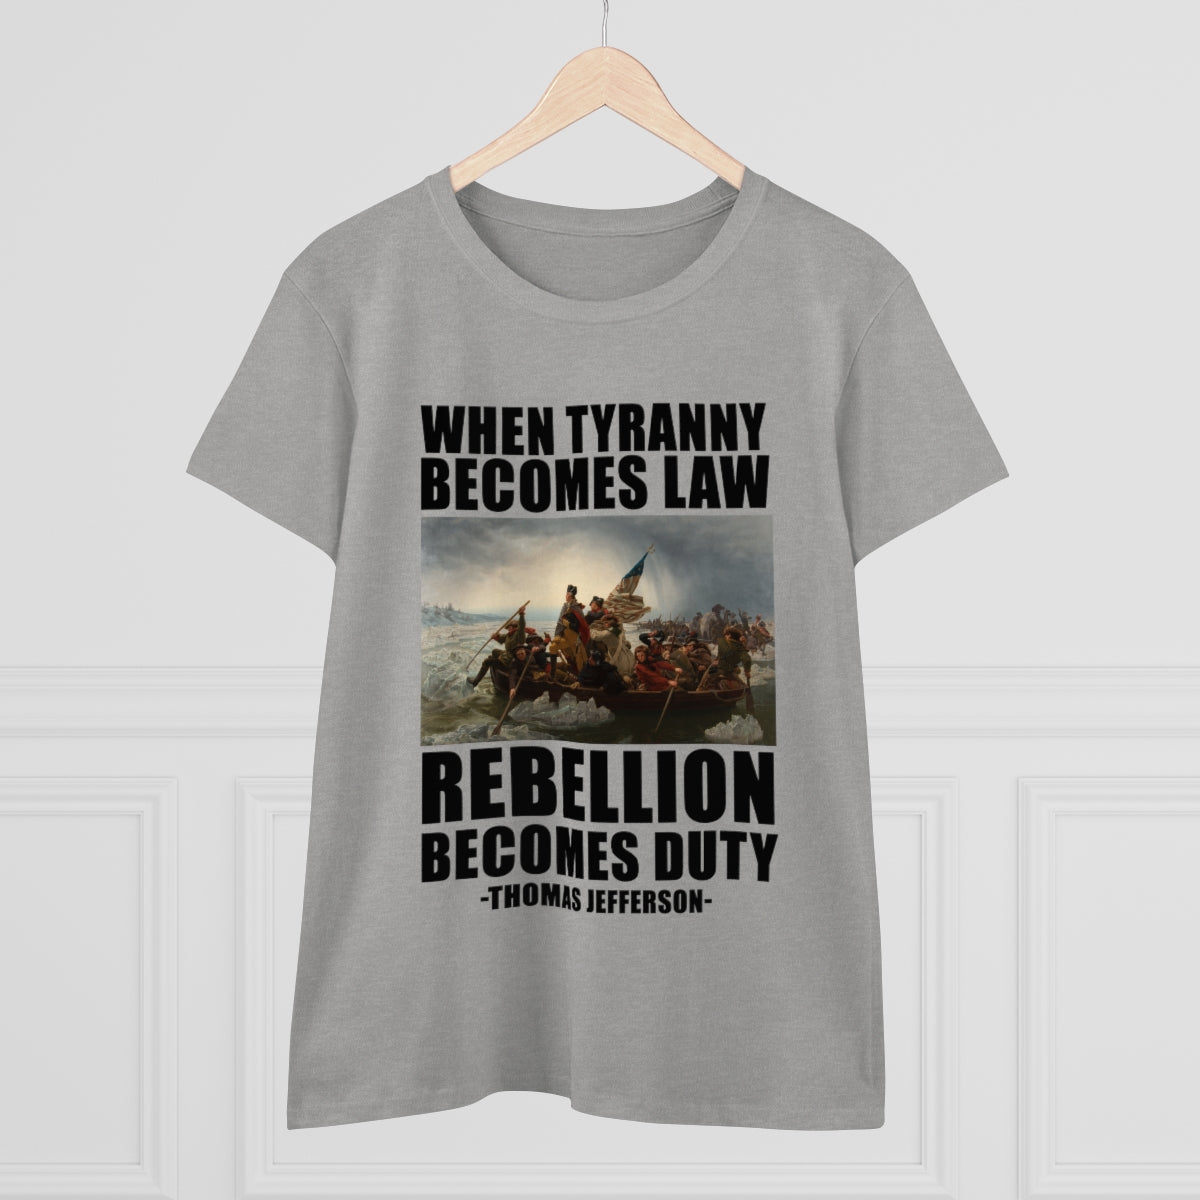 When Tyranny Becomes Law... | Women's Cotton Tee - Rise of The New Media